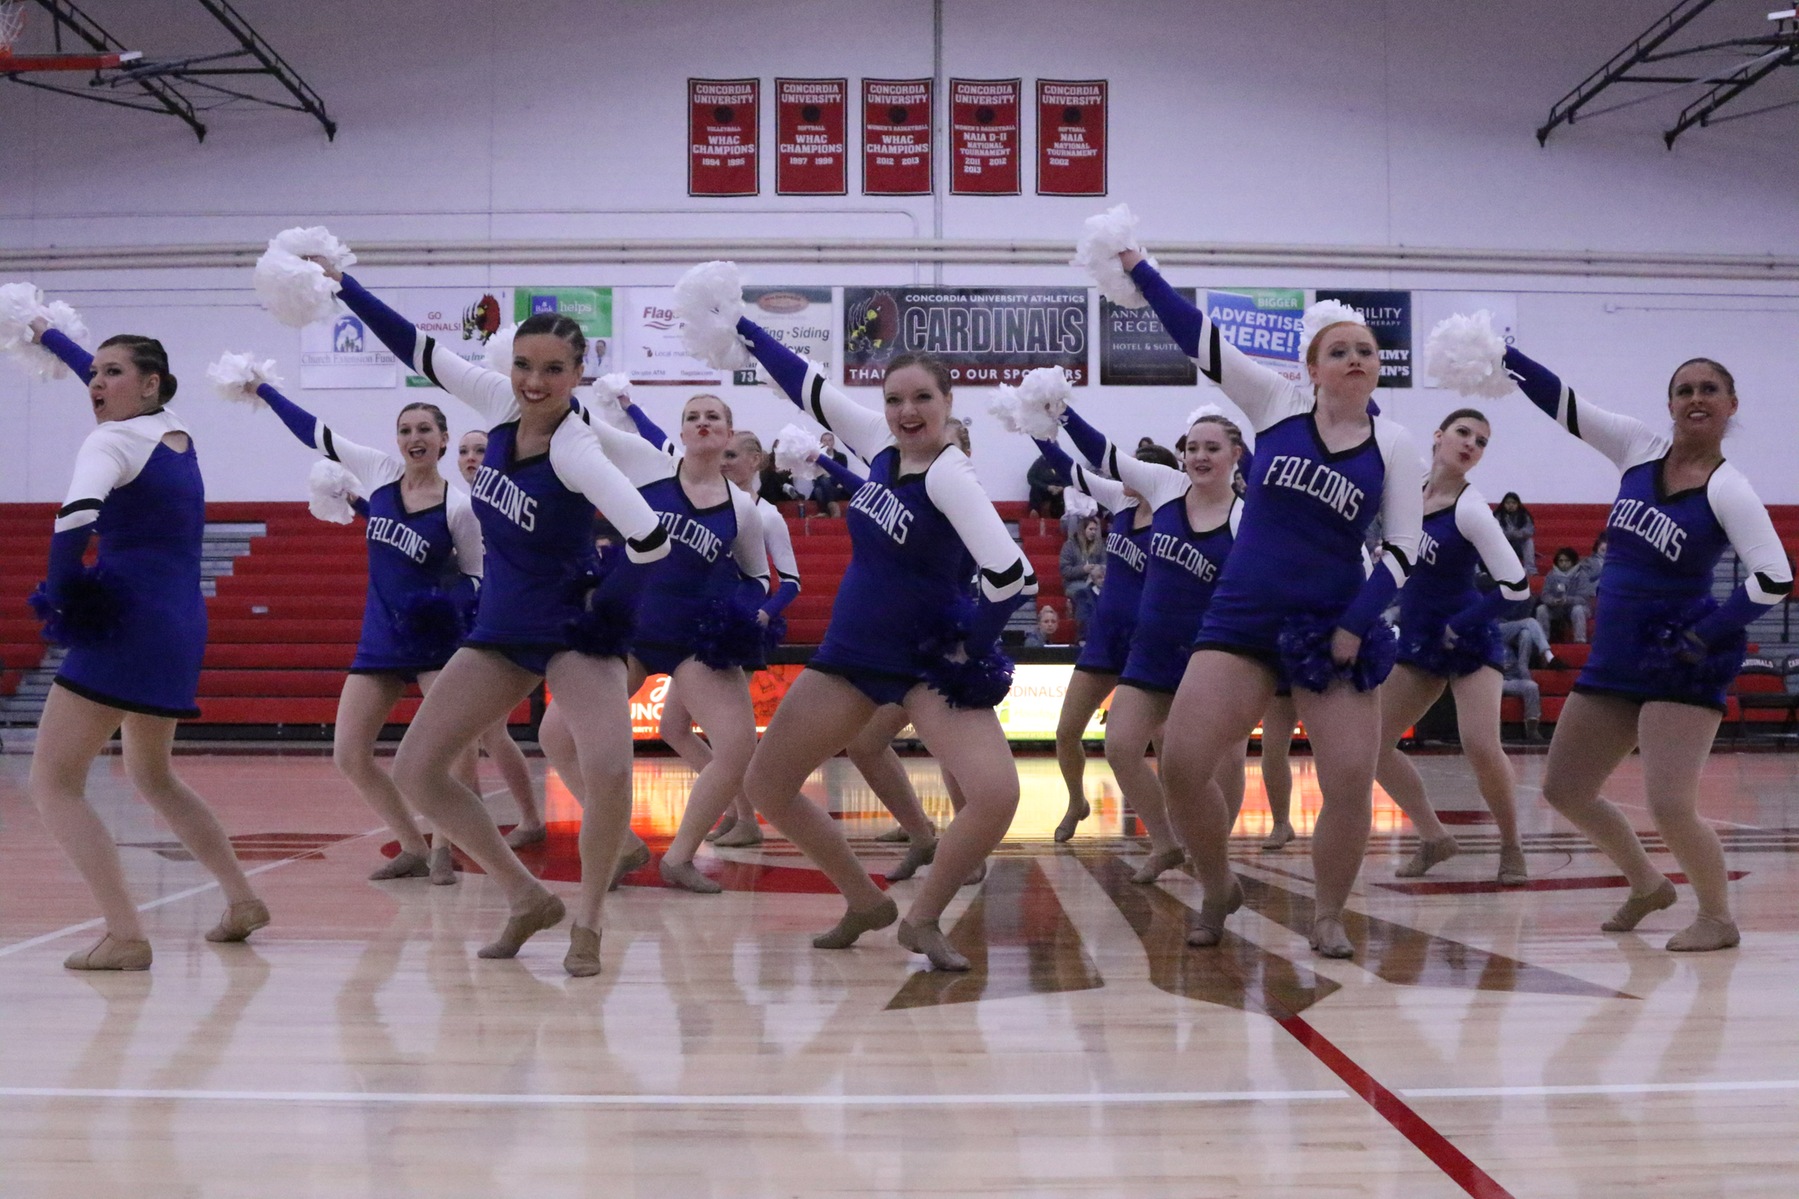 Dance finishes second at CIT